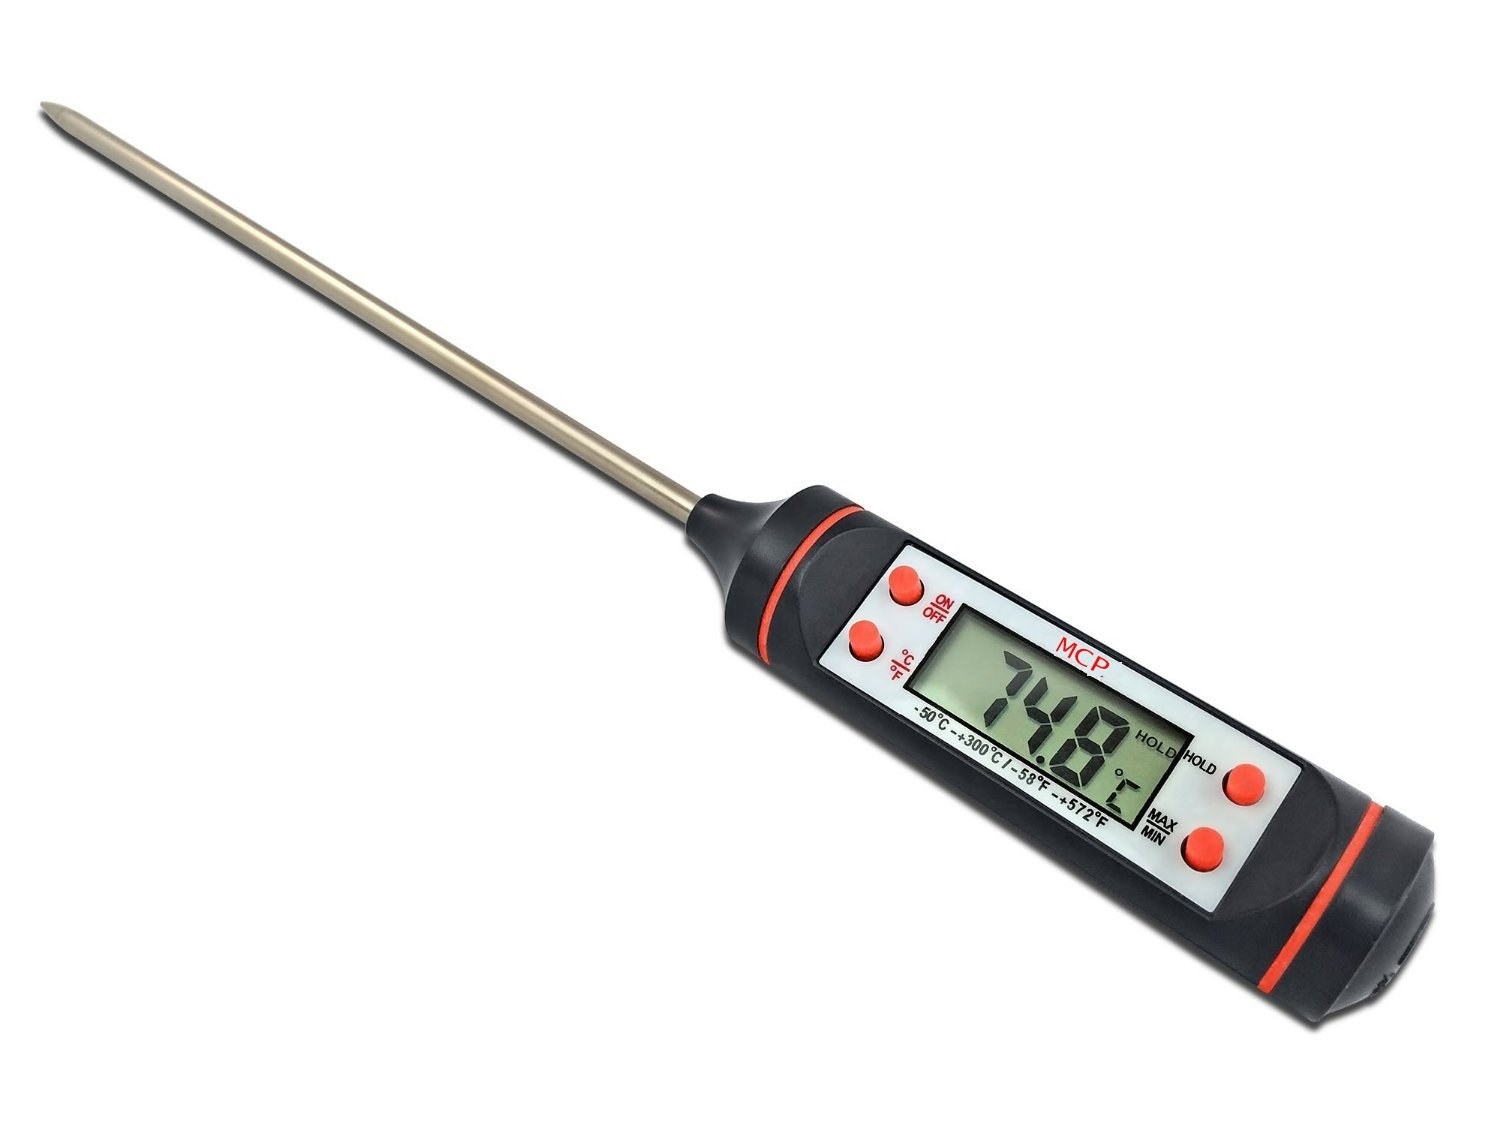 A kitchen thermometer